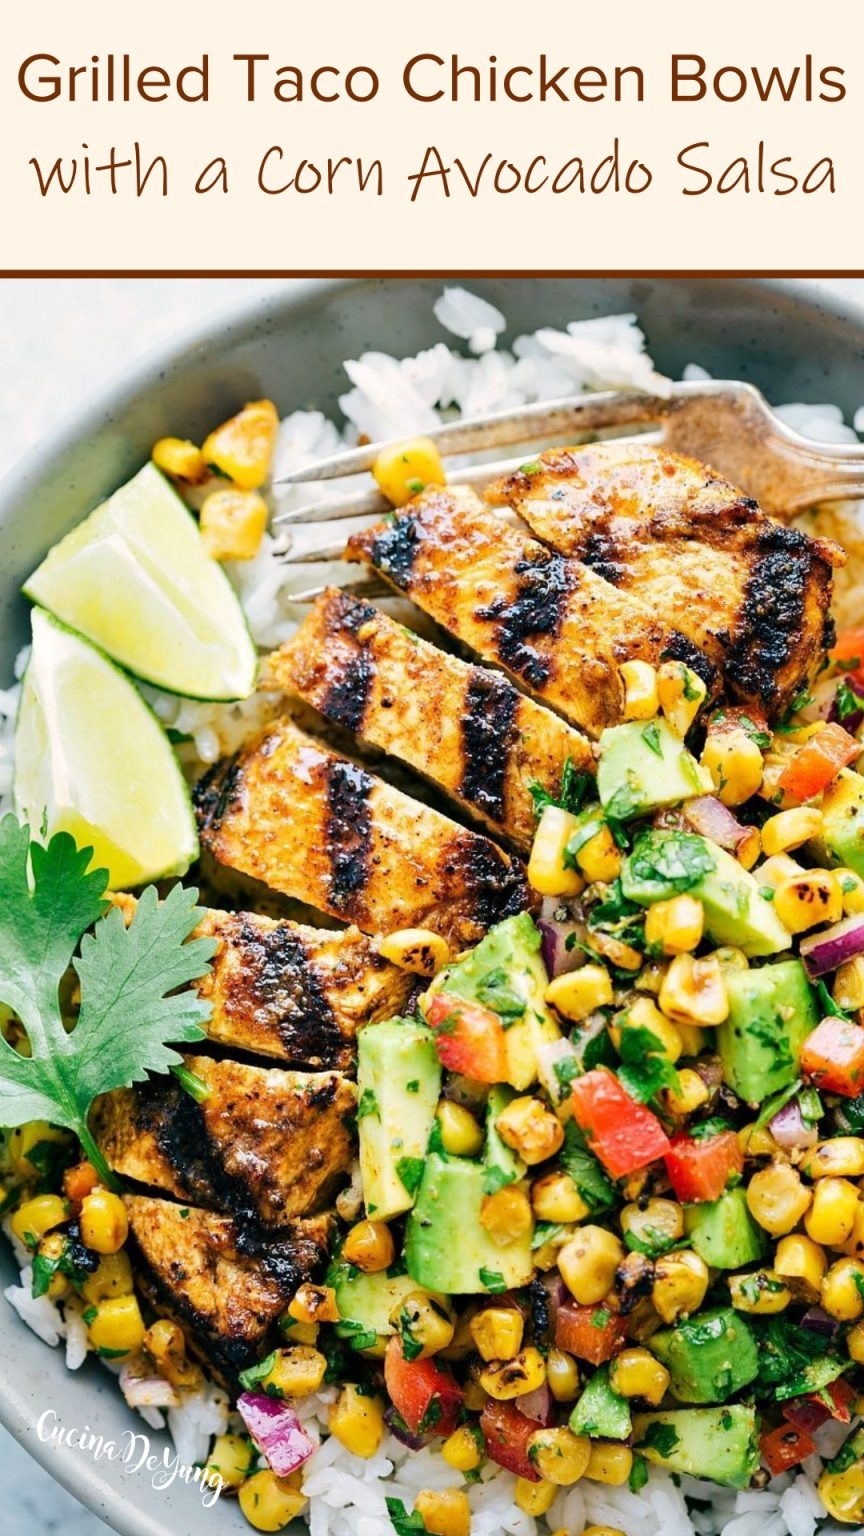 The BEST Grilled Taco Chicken Bowls with a Corn Avocado Salsa ...